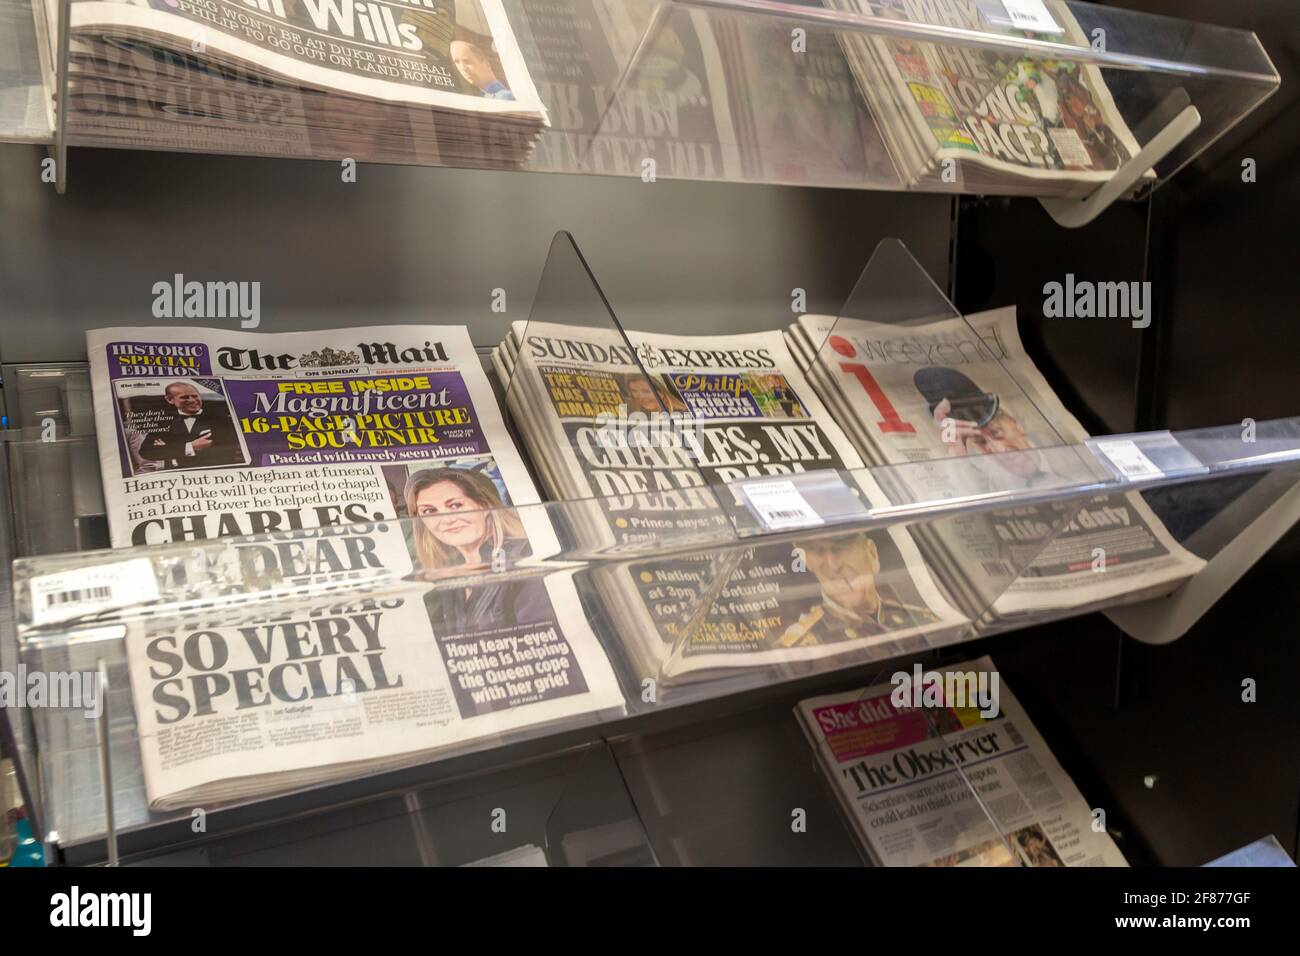 A newsstand inside a shop showing various newspapers for sale Stock Photo